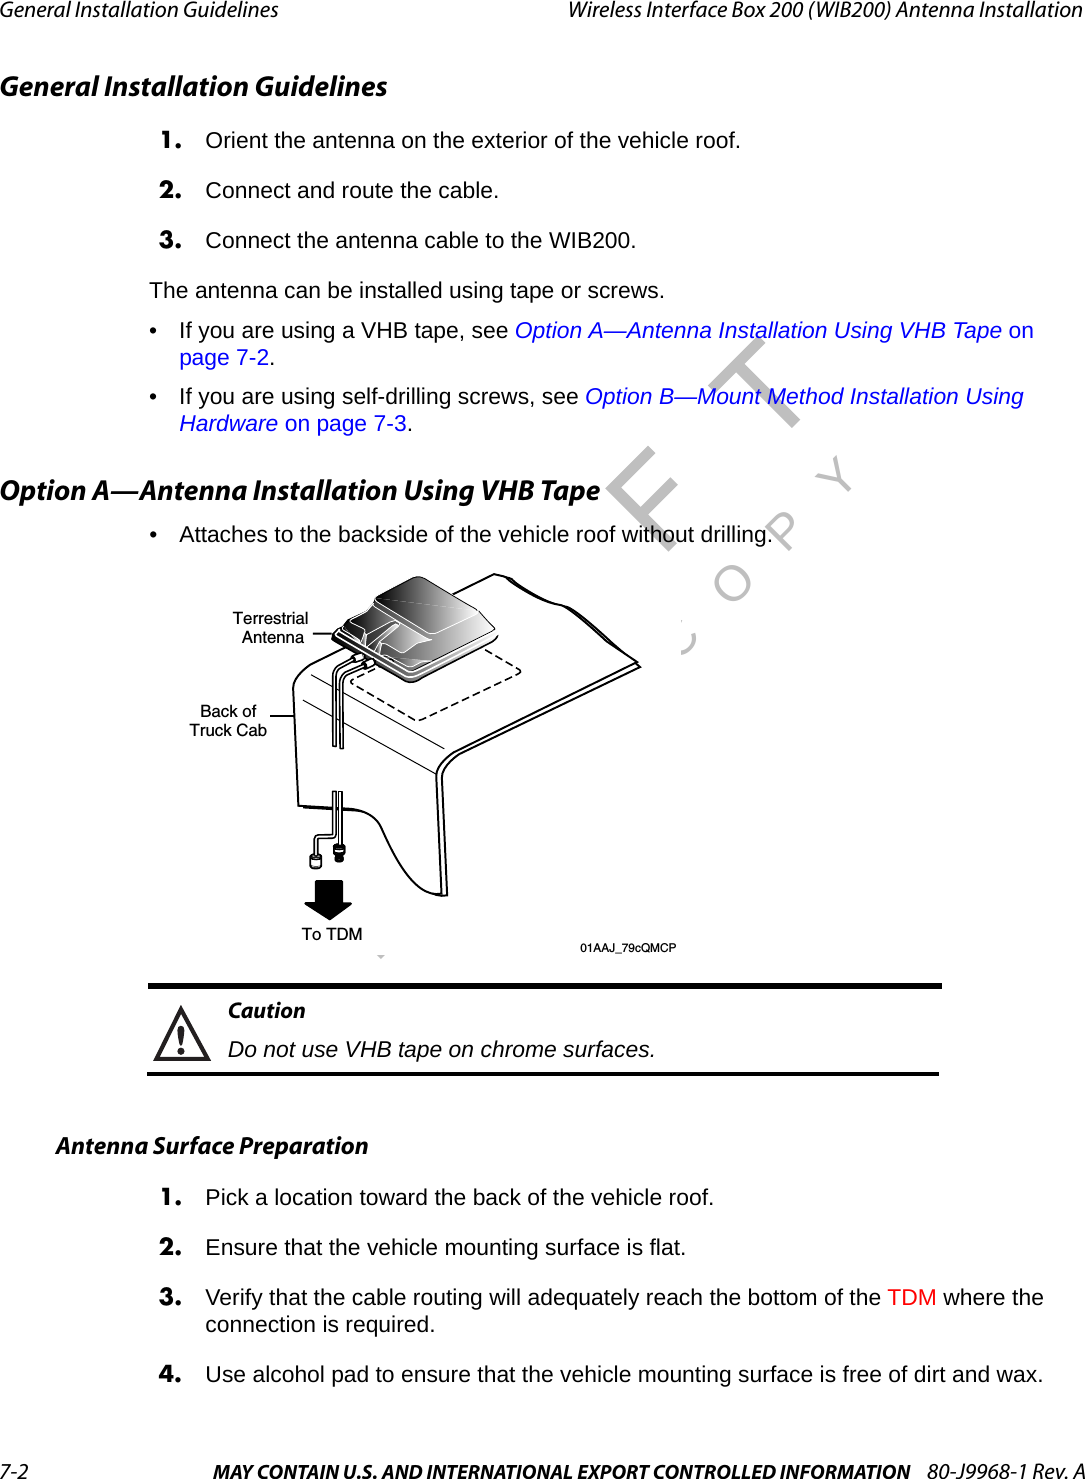 General Installation Guidelines Wireless Interface Box 200 (WIB200) Antenna Installation7-2 MAY CONTAIN U.S. AND INTERNATIONAL EXPORT CONTROLLED INFORMATION 80-J9968-1 Rev. ADO NOT COPYGeneral Installation Guidelines1. Orient the antenna on the exterior of the vehicle roof.2. Connect and route the cable.3. Connect the antenna cable to the WIB200.The antenna can be installed using tape or screws.• If you are using a VHB tape, see Option A—Antenna Installation Using VHB Tape on page 7-2.• If you are using self-drilling screws, see Option B—Mount Method Installation Using Hardware on page 7-3.Option A—Antenna Installation Using VHB Tape• Attaches to the backside of the vehicle roof without drilling.CautionDo not use VHB tape on chrome surfaces.Antenna Surface Preparation1. Pick a location toward the back of the vehicle roof.2. Ensure that the vehicle mounting surface is flat. 3. Verify that the cable routing will adequately reach the bottom of the TDM where the connection is required.4. Use alcohol pad to ensure that the vehicle mounting surface is free of dirt and wax. Terrestrial AntennaTo TDMBack ofTruck Cab       01AAJ_79cQMCP 